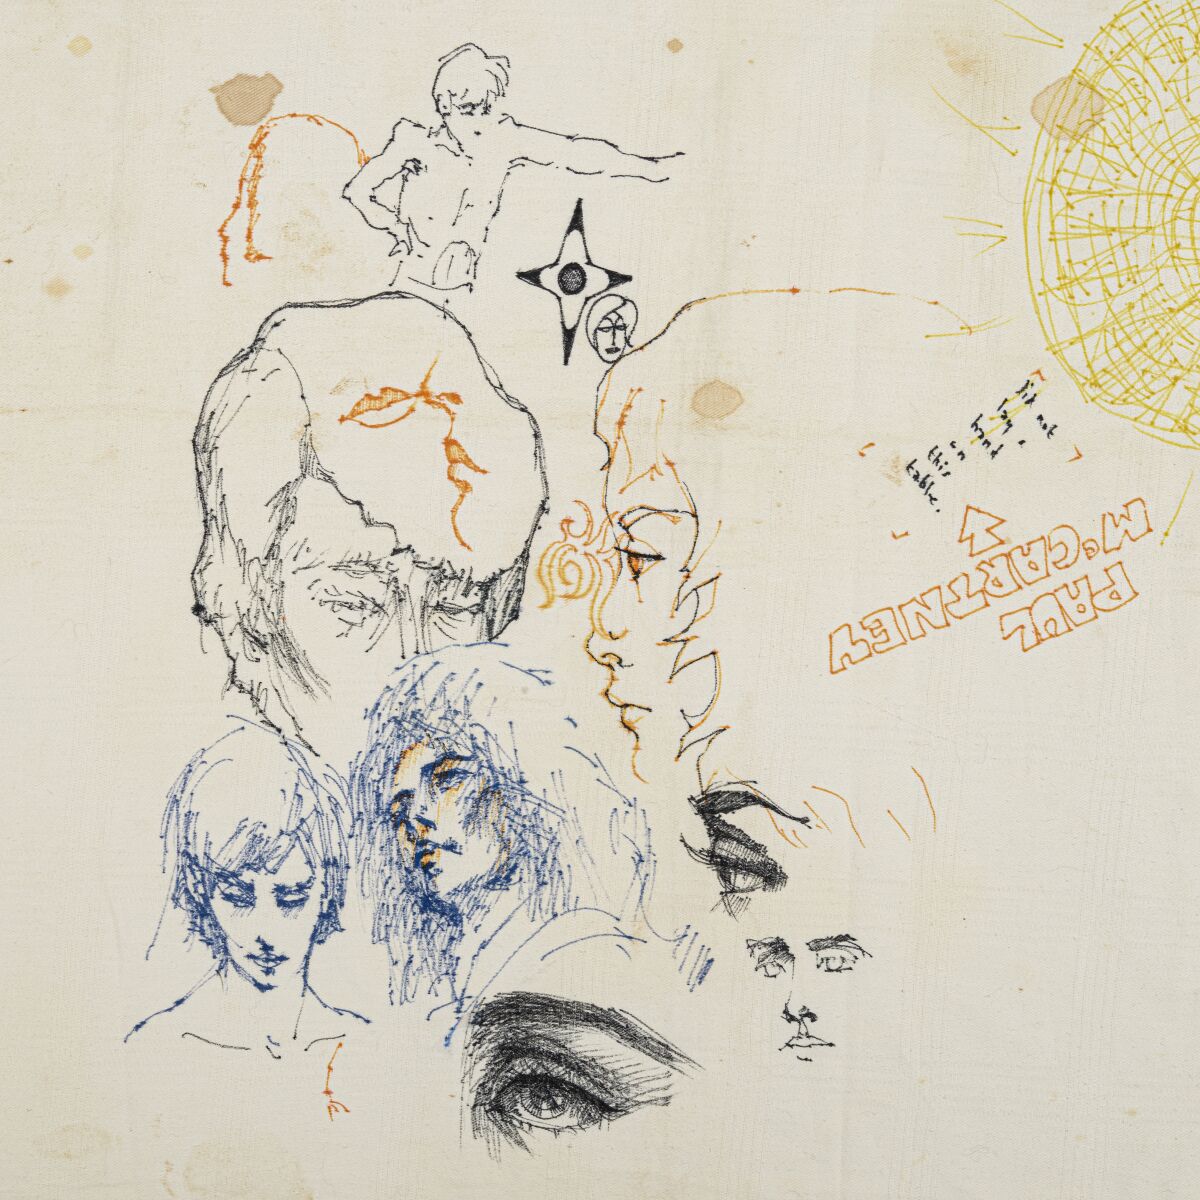 A closeup of a tablecloth with signatures and drawings by the Beatles from 1966.